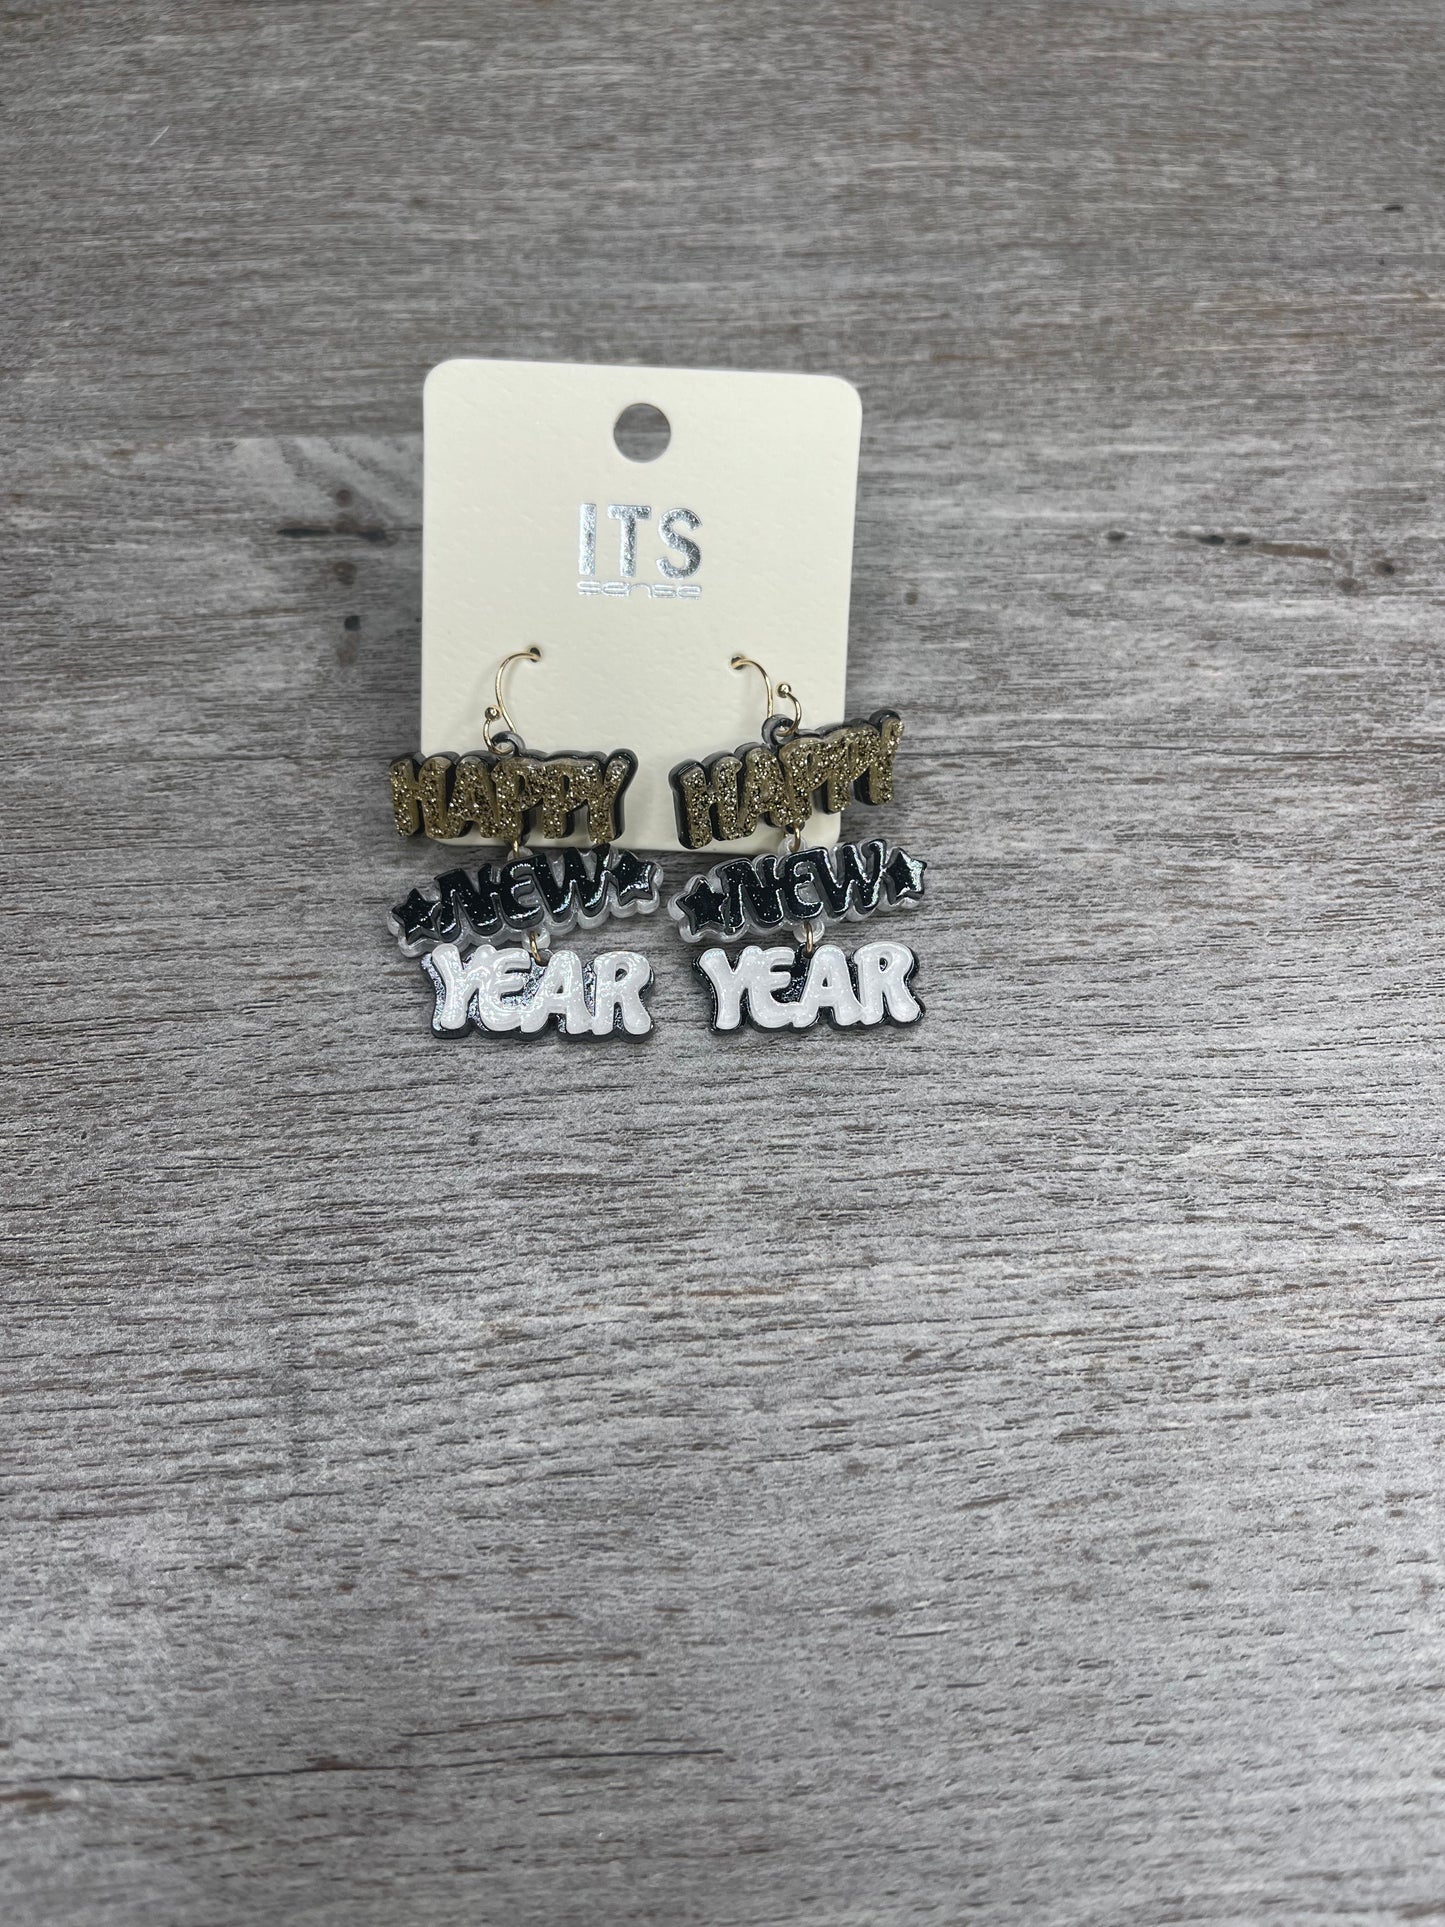 Have A Sparkling New Year Earrings